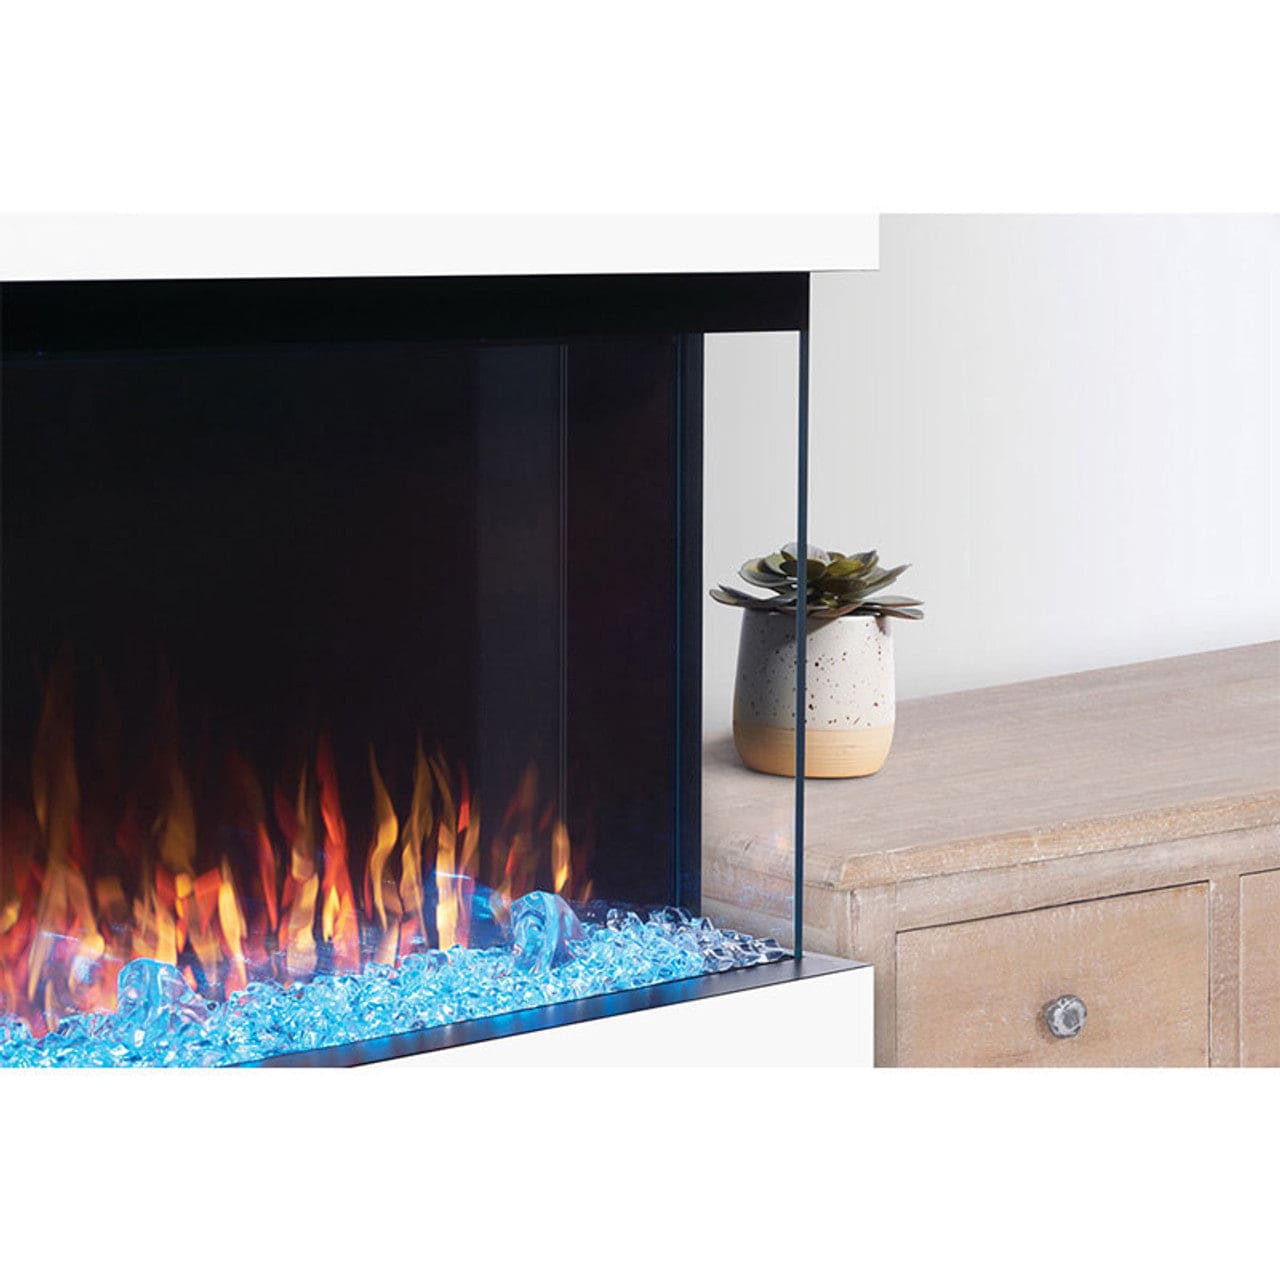 Trivista 60 3-Sided Built-In Electric Linear Fireplace - NEFB60H-3SV - Chimney Cricket